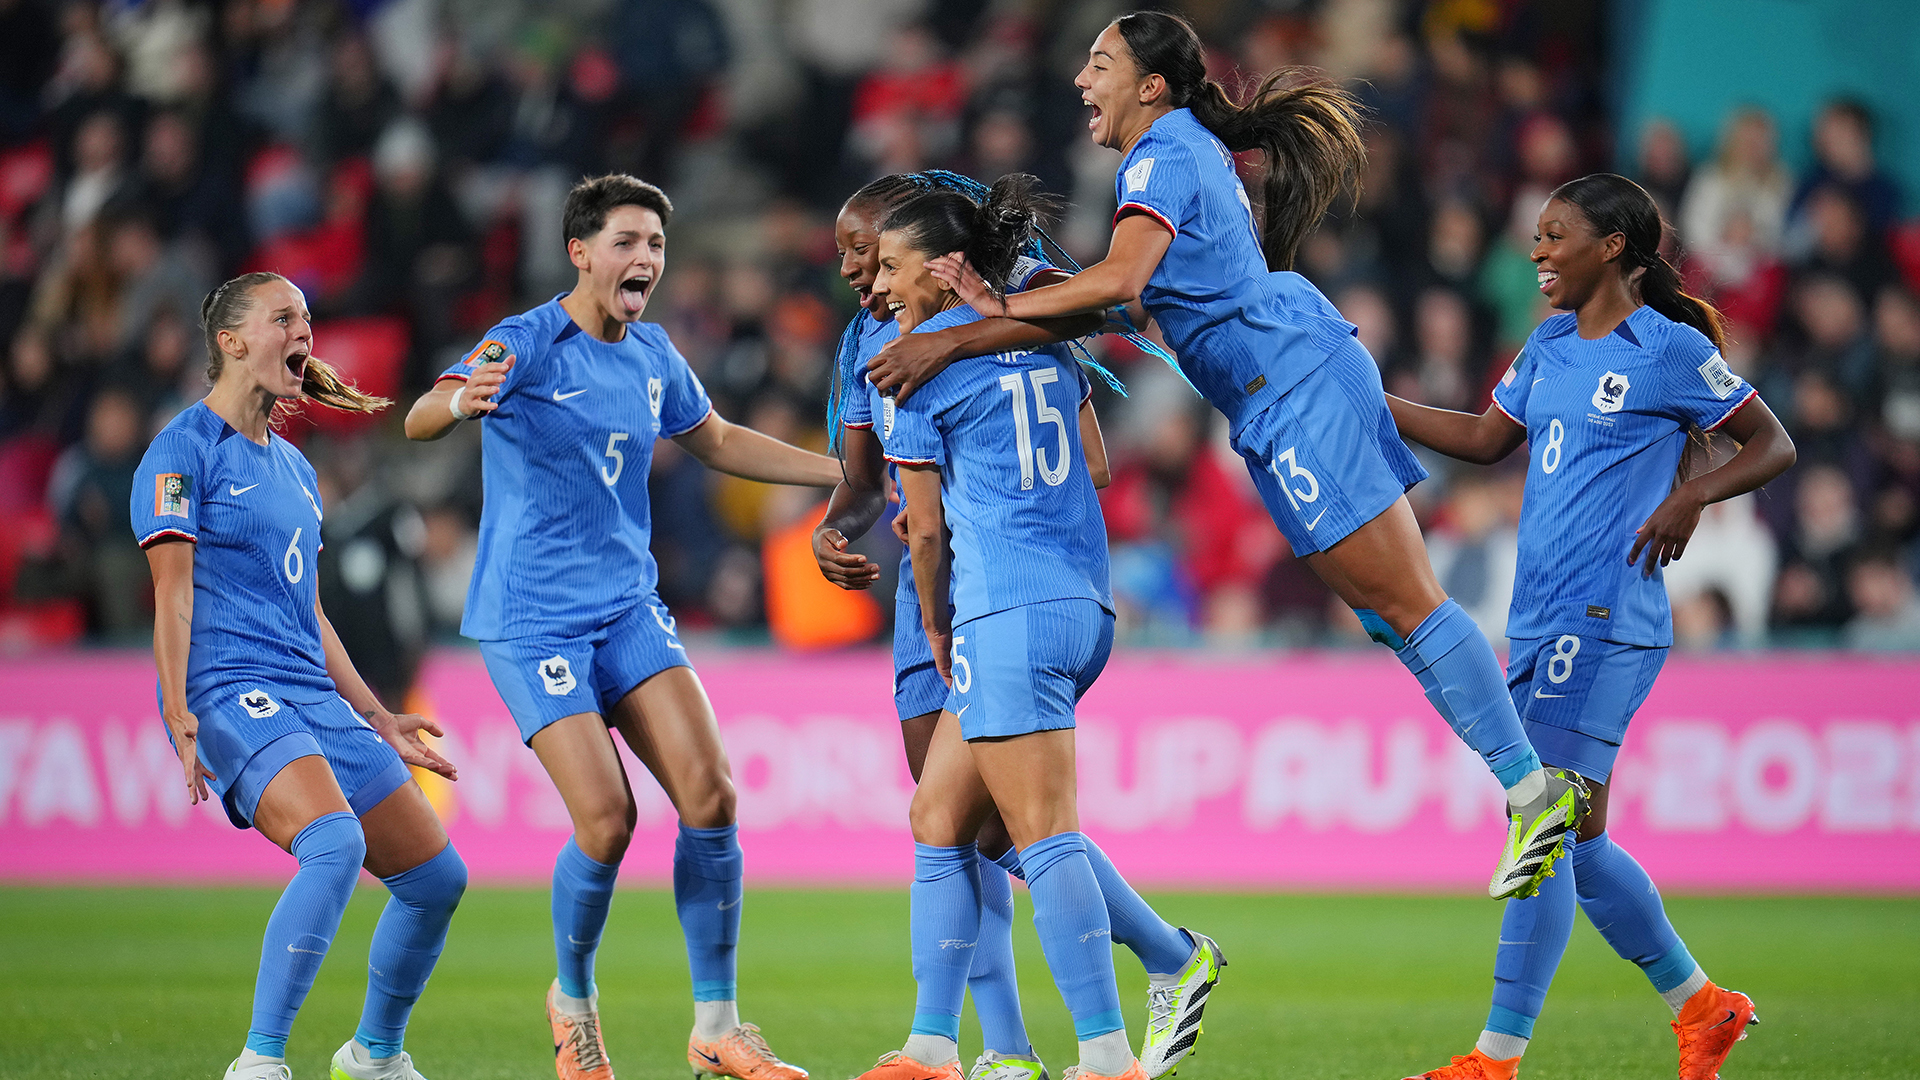 Kenza Dali (3rd R) of France celebrates with teammates after scoring her team's second goal during the FIFA Women's World Cup Australia &amp; New Zealand 2023 Round of 16 match between France and Morocco at Hindmarsh Stadium on August 08, 2023 in Adelaide / Tarntanya, Australia.